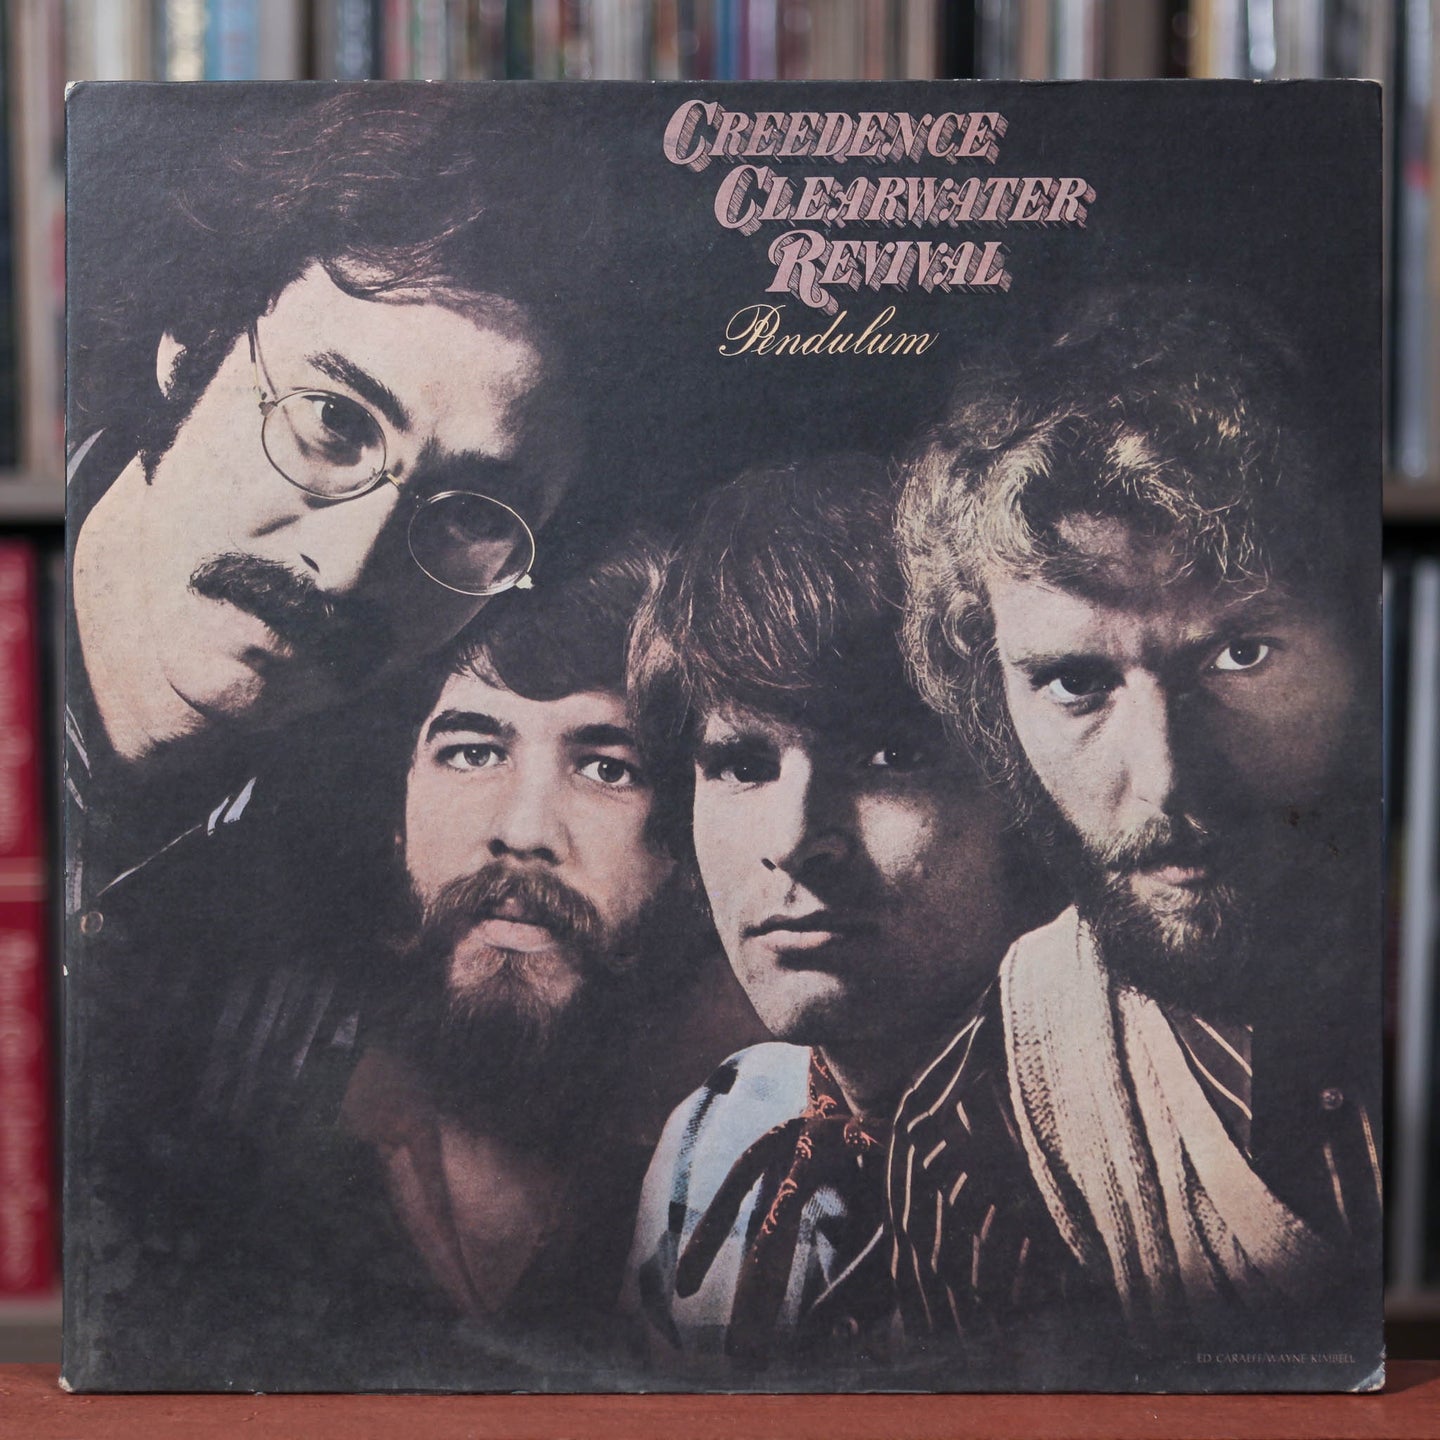 Creedence Clearwater Revival - Pendulum - 1970 Fantasy - VG++/VG